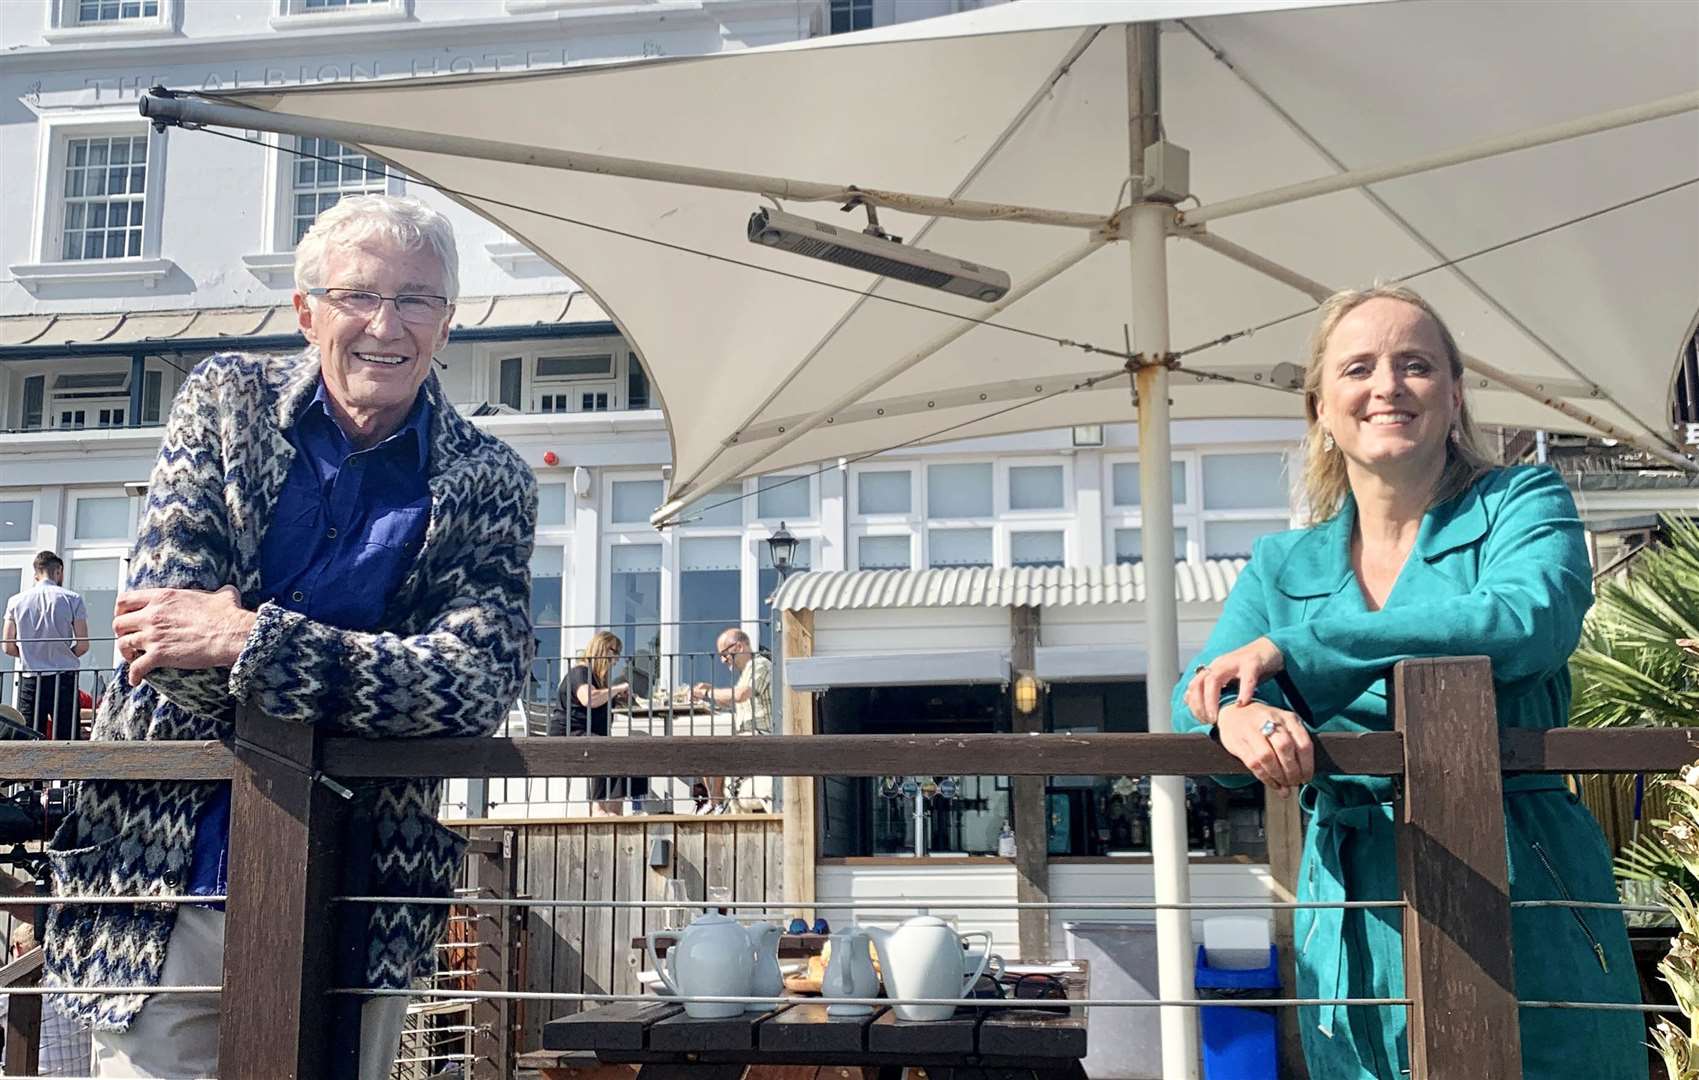 Paul O'Grady meets Charles Dickens great great great grand daughter Lucinda Hawksley in Broadstairs Picture: Olga Productions/ITV